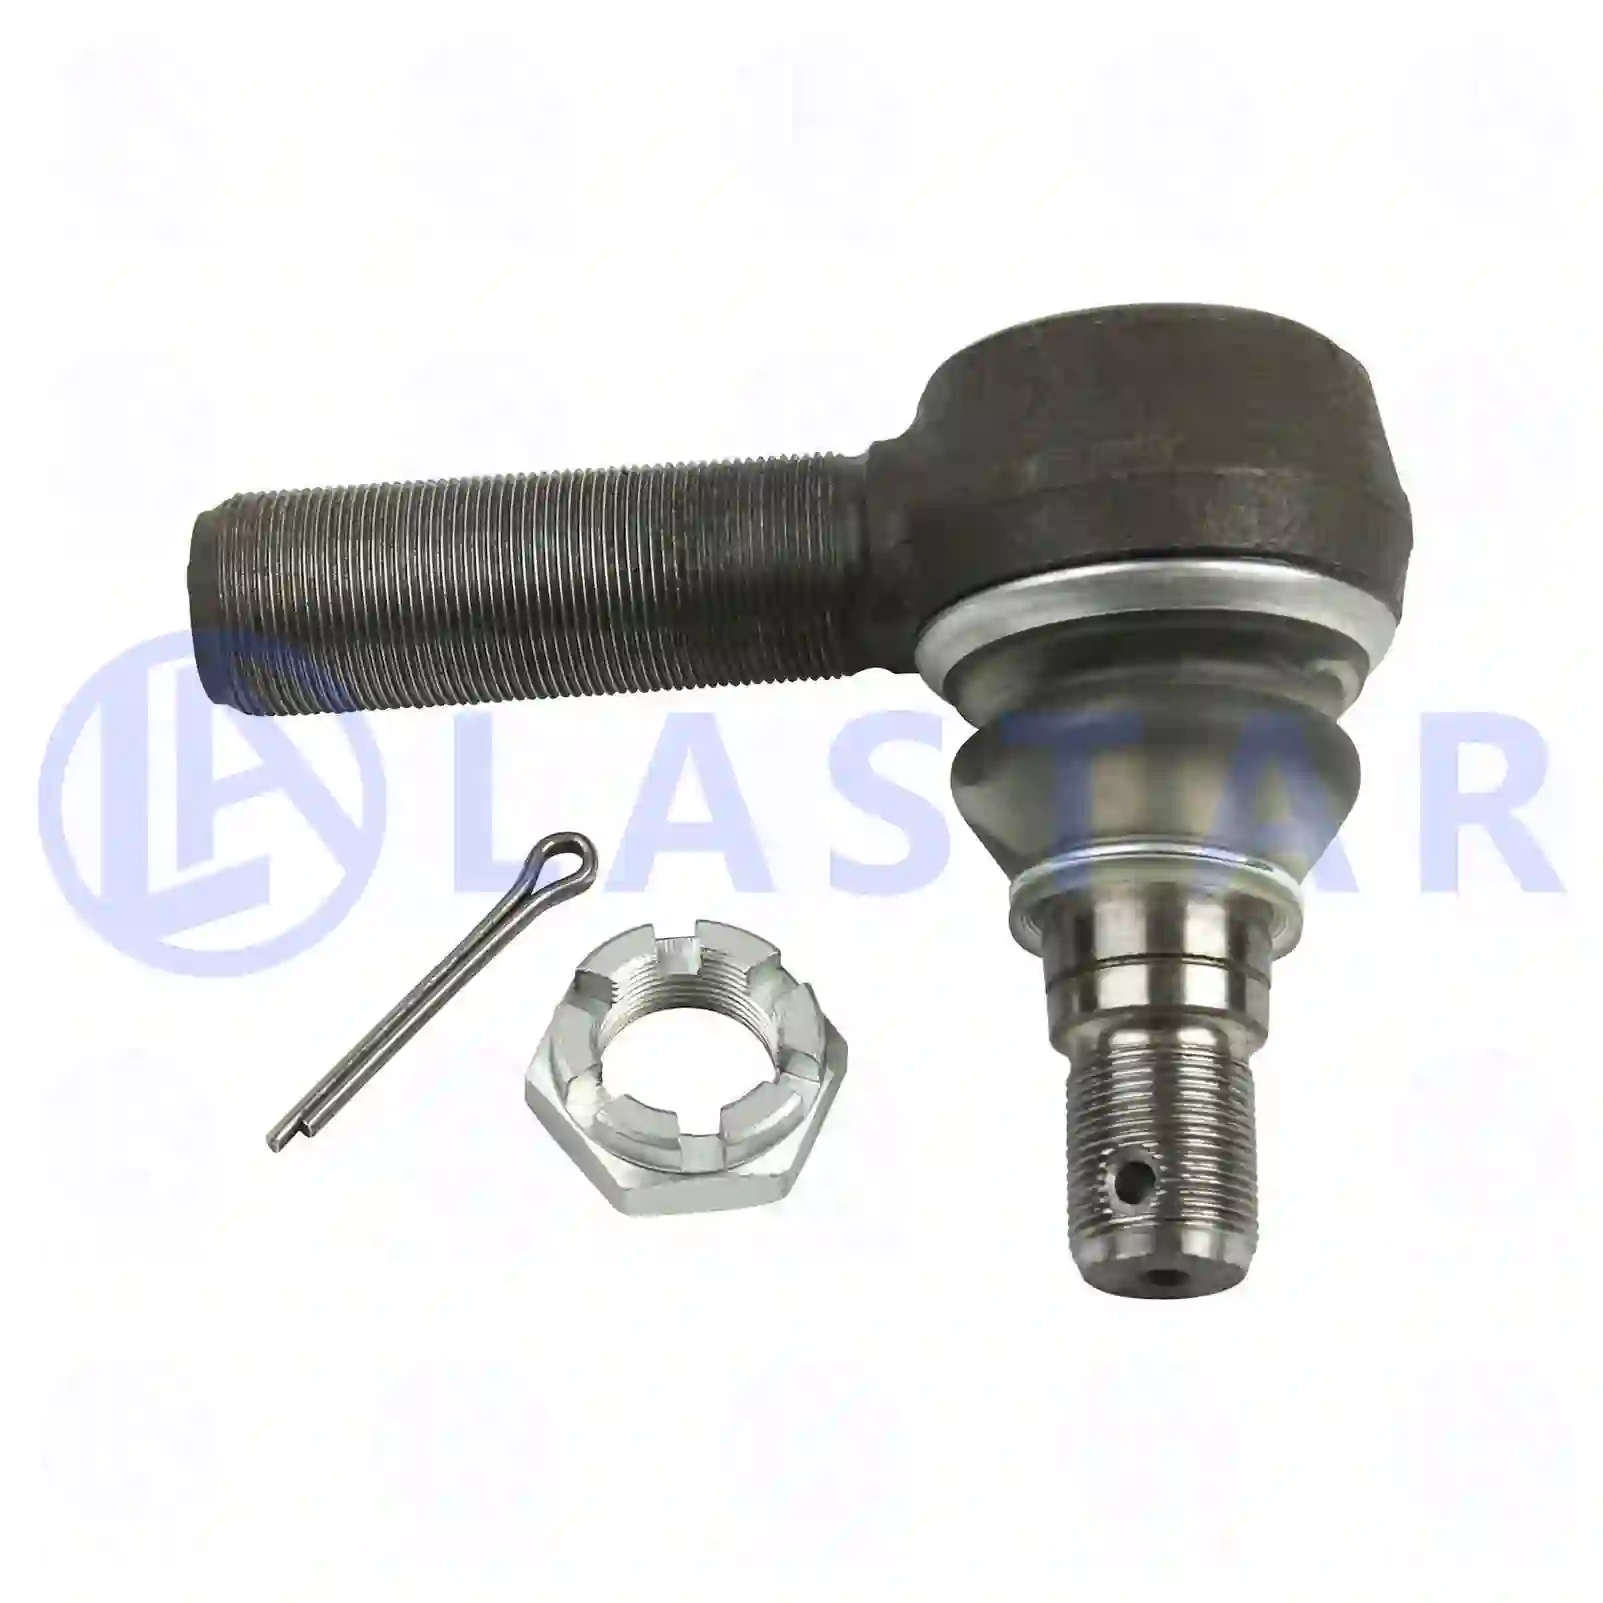 Ball joint, right hand thread, 77705726, 1507826, 1695585, 1695776, 1698557, 356310, 619687, 6882111, 6889480, 6889482, 85114146, ZG40367-0008 ||  77705726 Lastar Spare Part | Truck Spare Parts, Auotomotive Spare Parts Ball joint, right hand thread, 77705726, 1507826, 1695585, 1695776, 1698557, 356310, 619687, 6882111, 6889480, 6889482, 85114146, ZG40367-0008 ||  77705726 Lastar Spare Part | Truck Spare Parts, Auotomotive Spare Parts